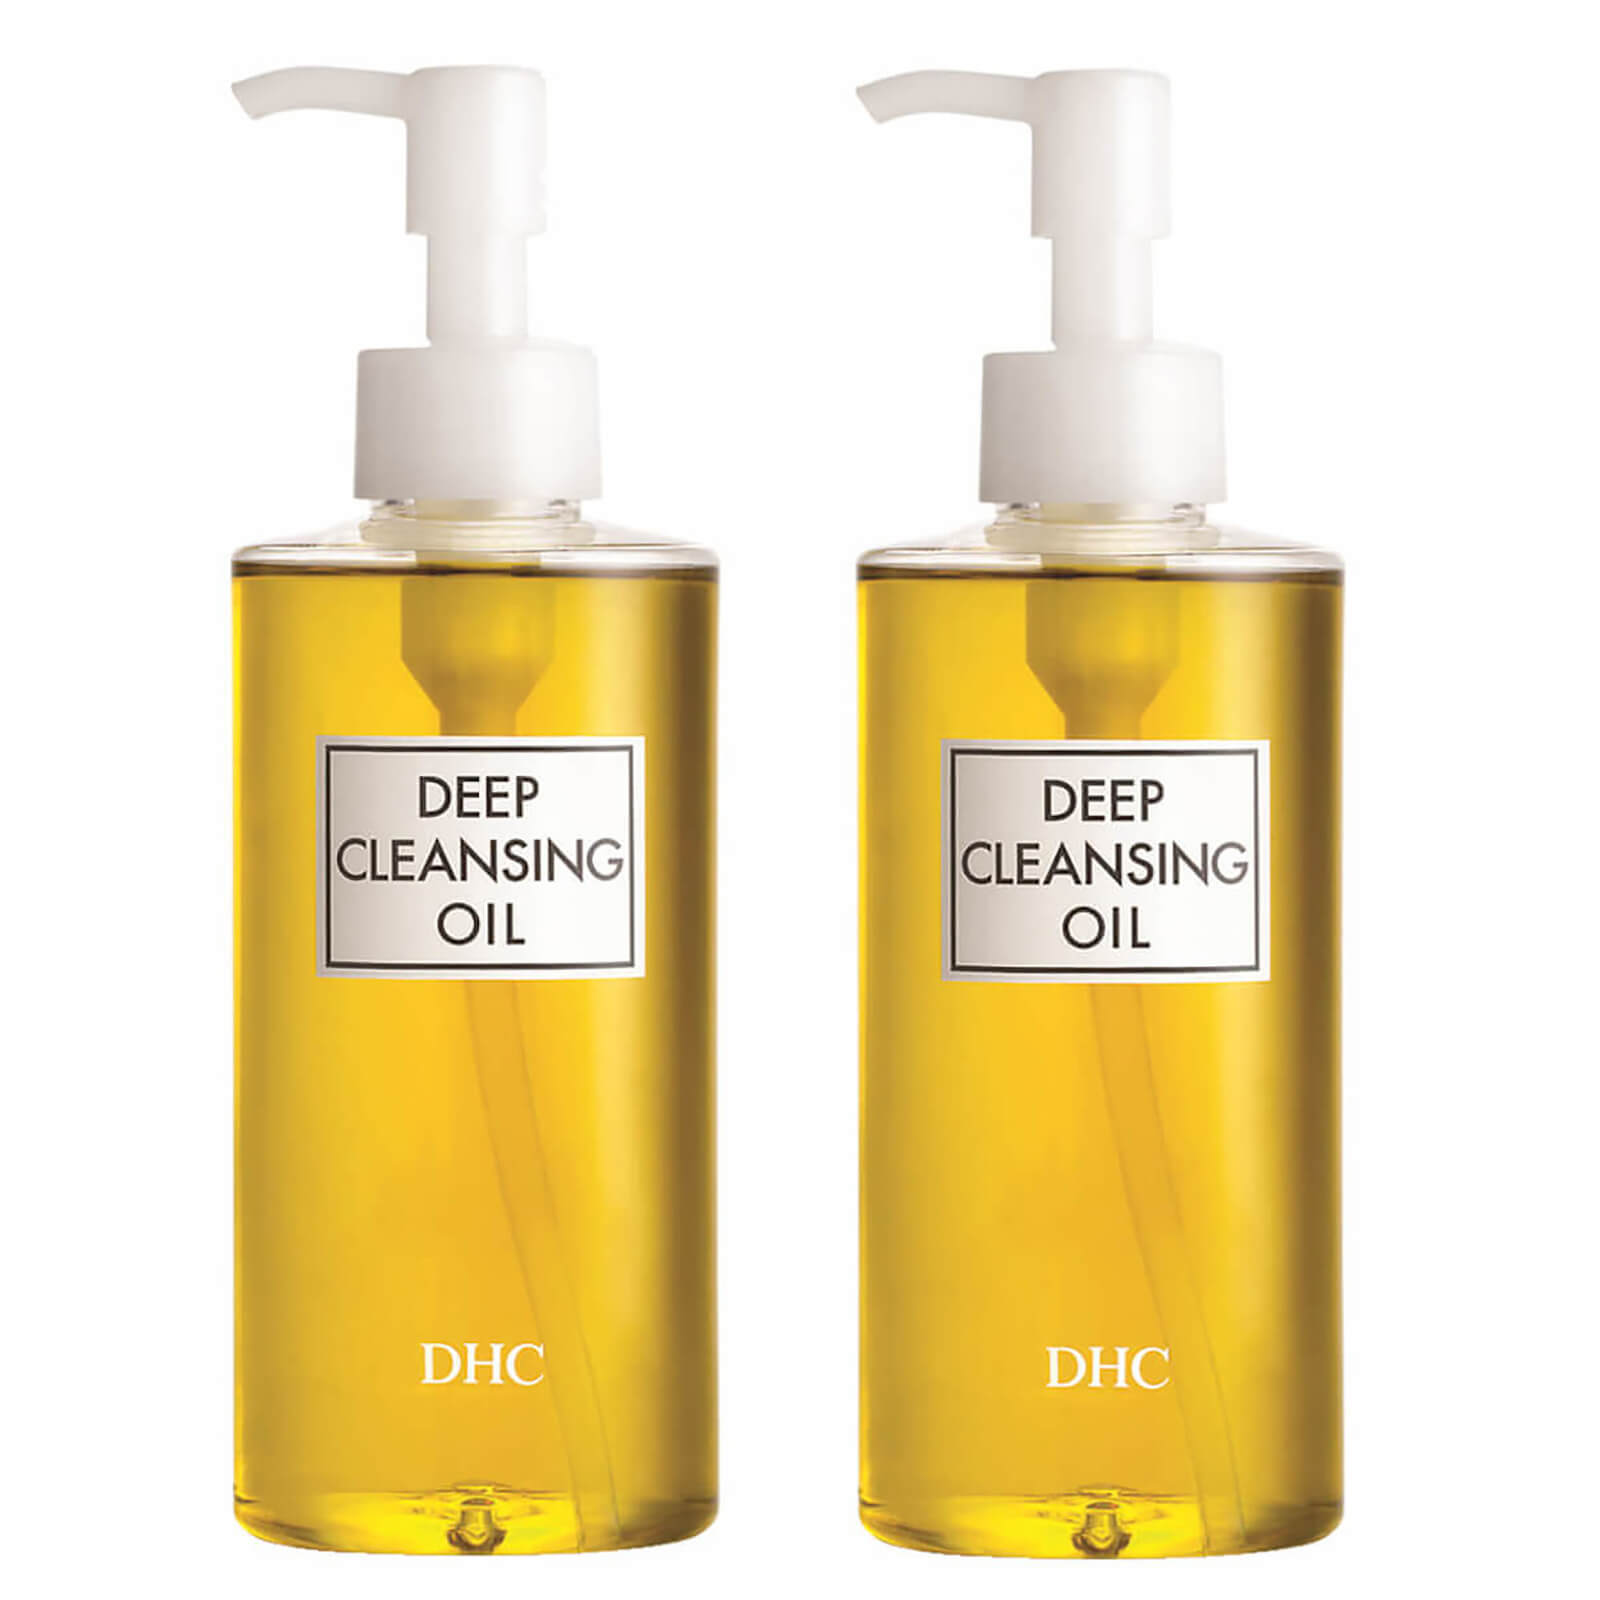 Photos - Facial / Body Cleansing Product DHC Deep Cleansing Oil Duo 2 x 200ml DHC-OIL2